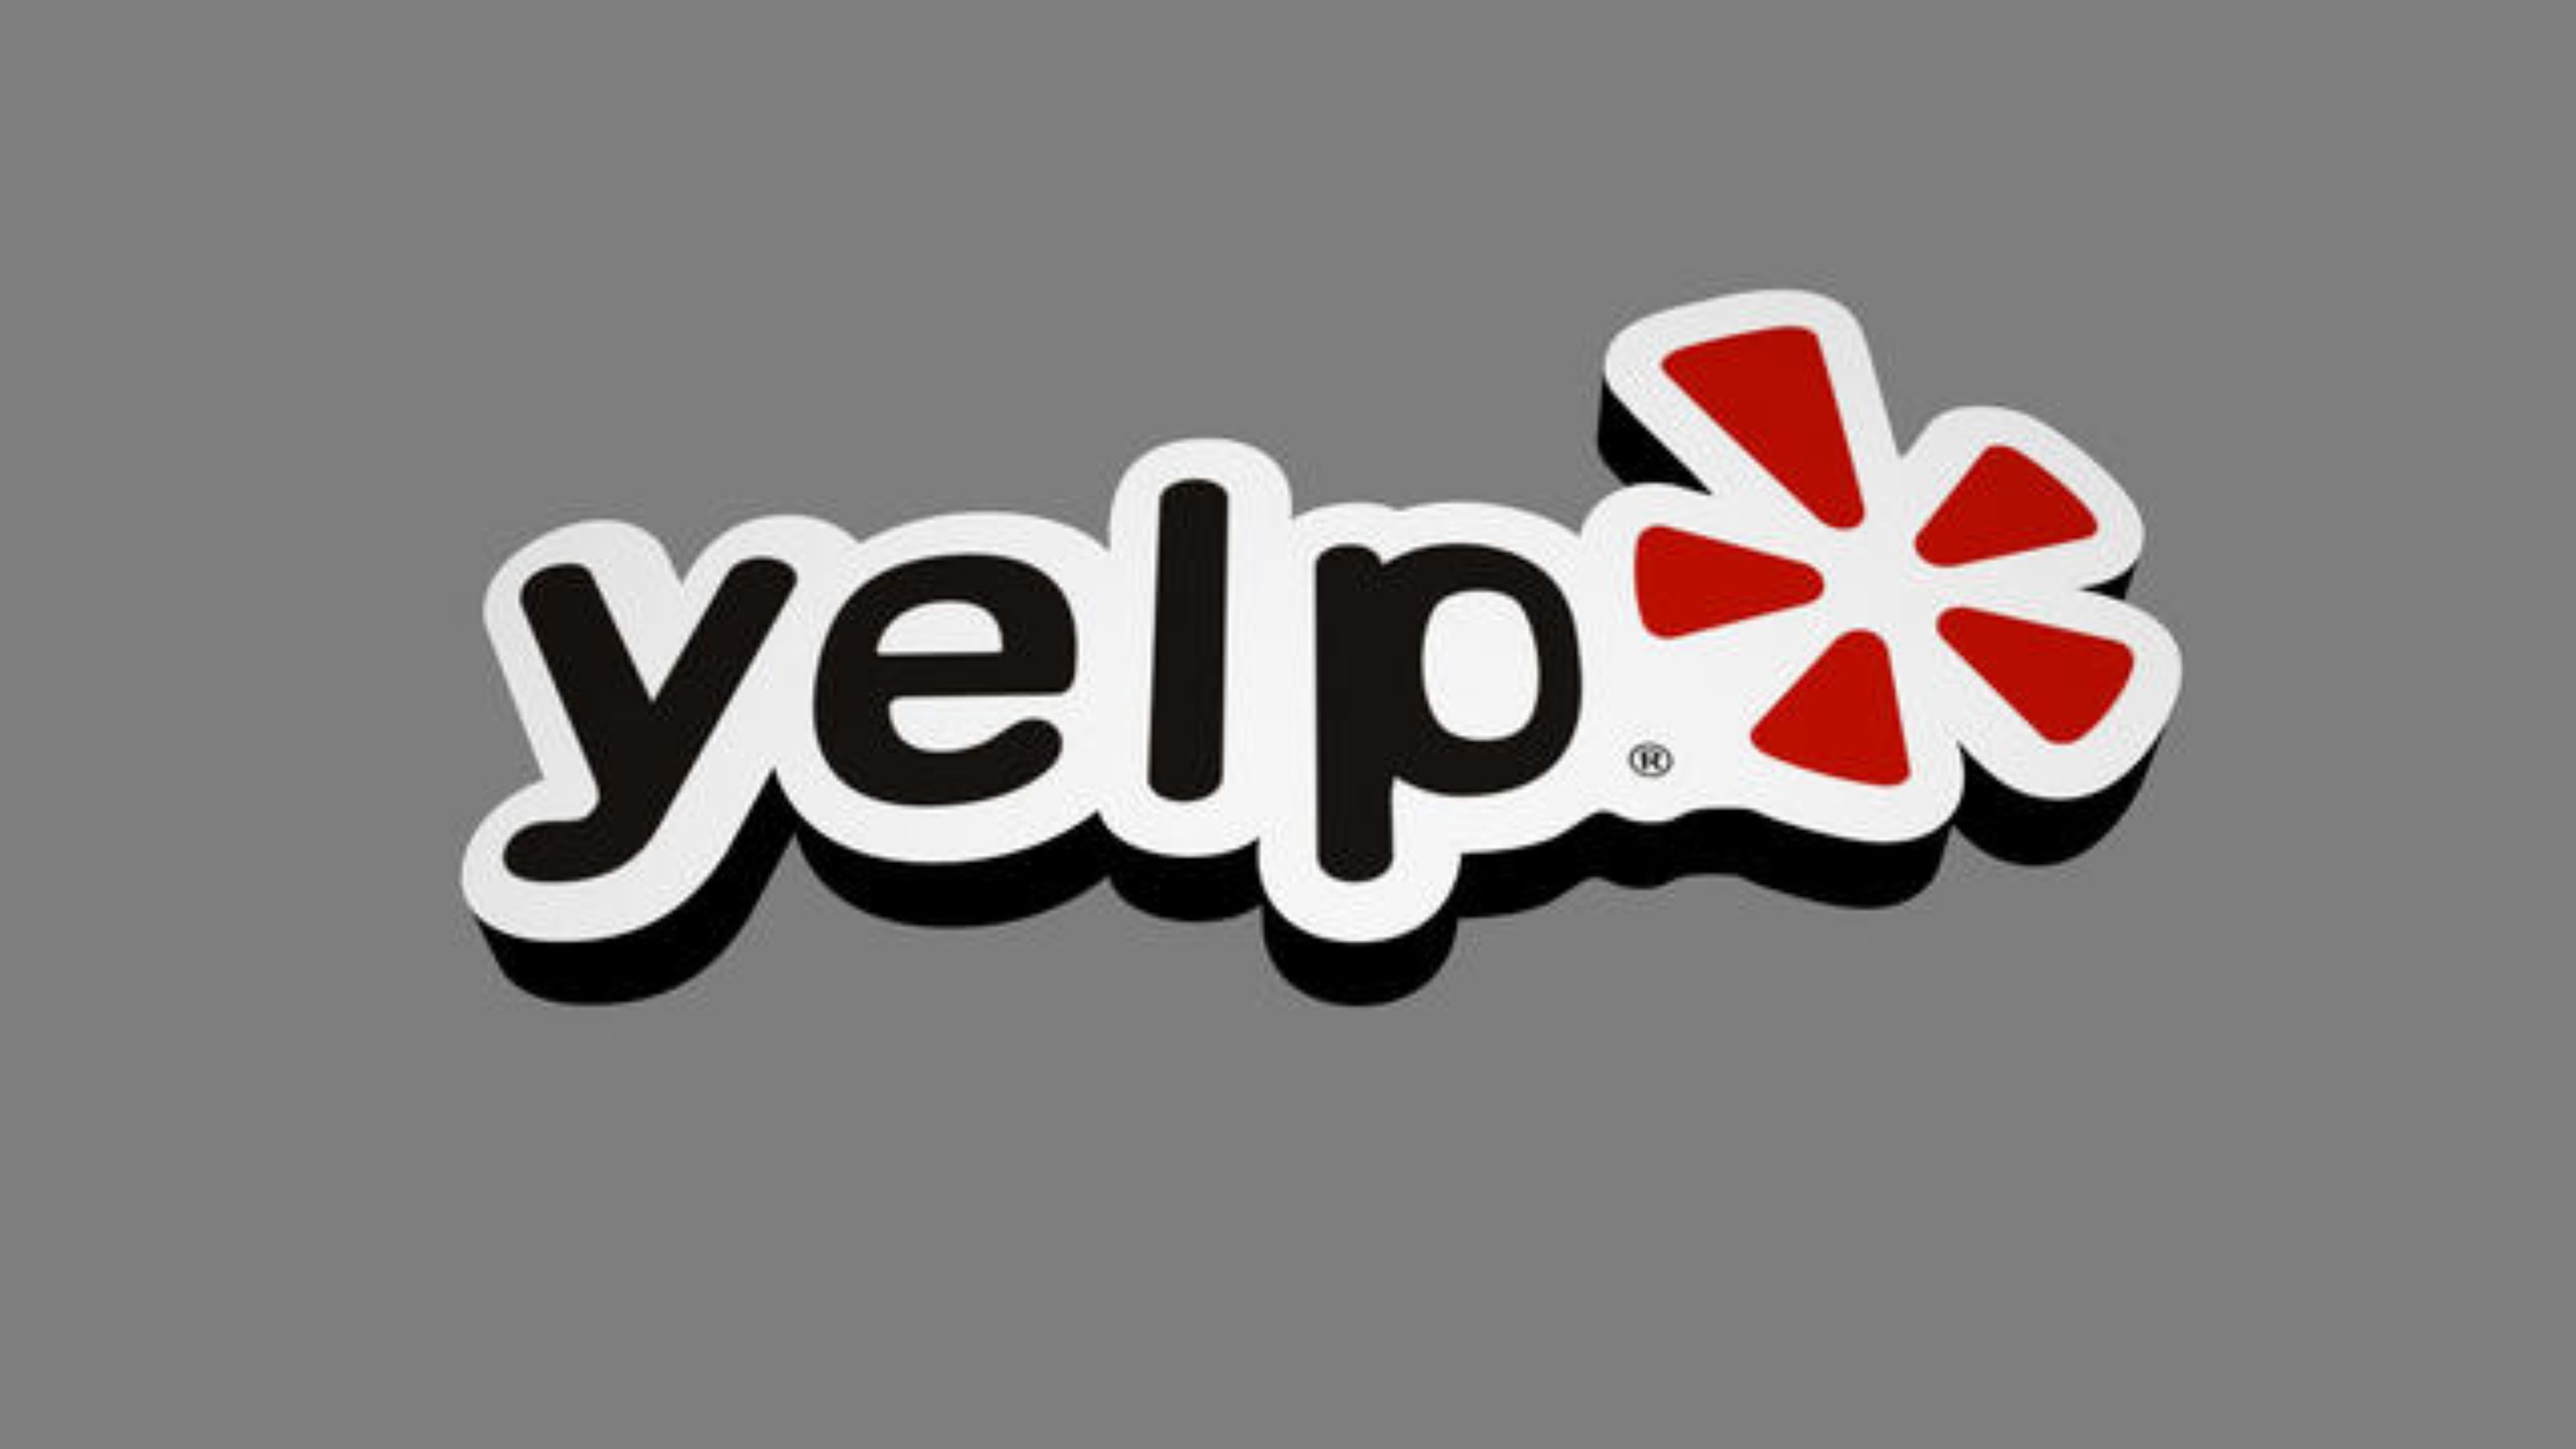 yelp icon 5 star outline